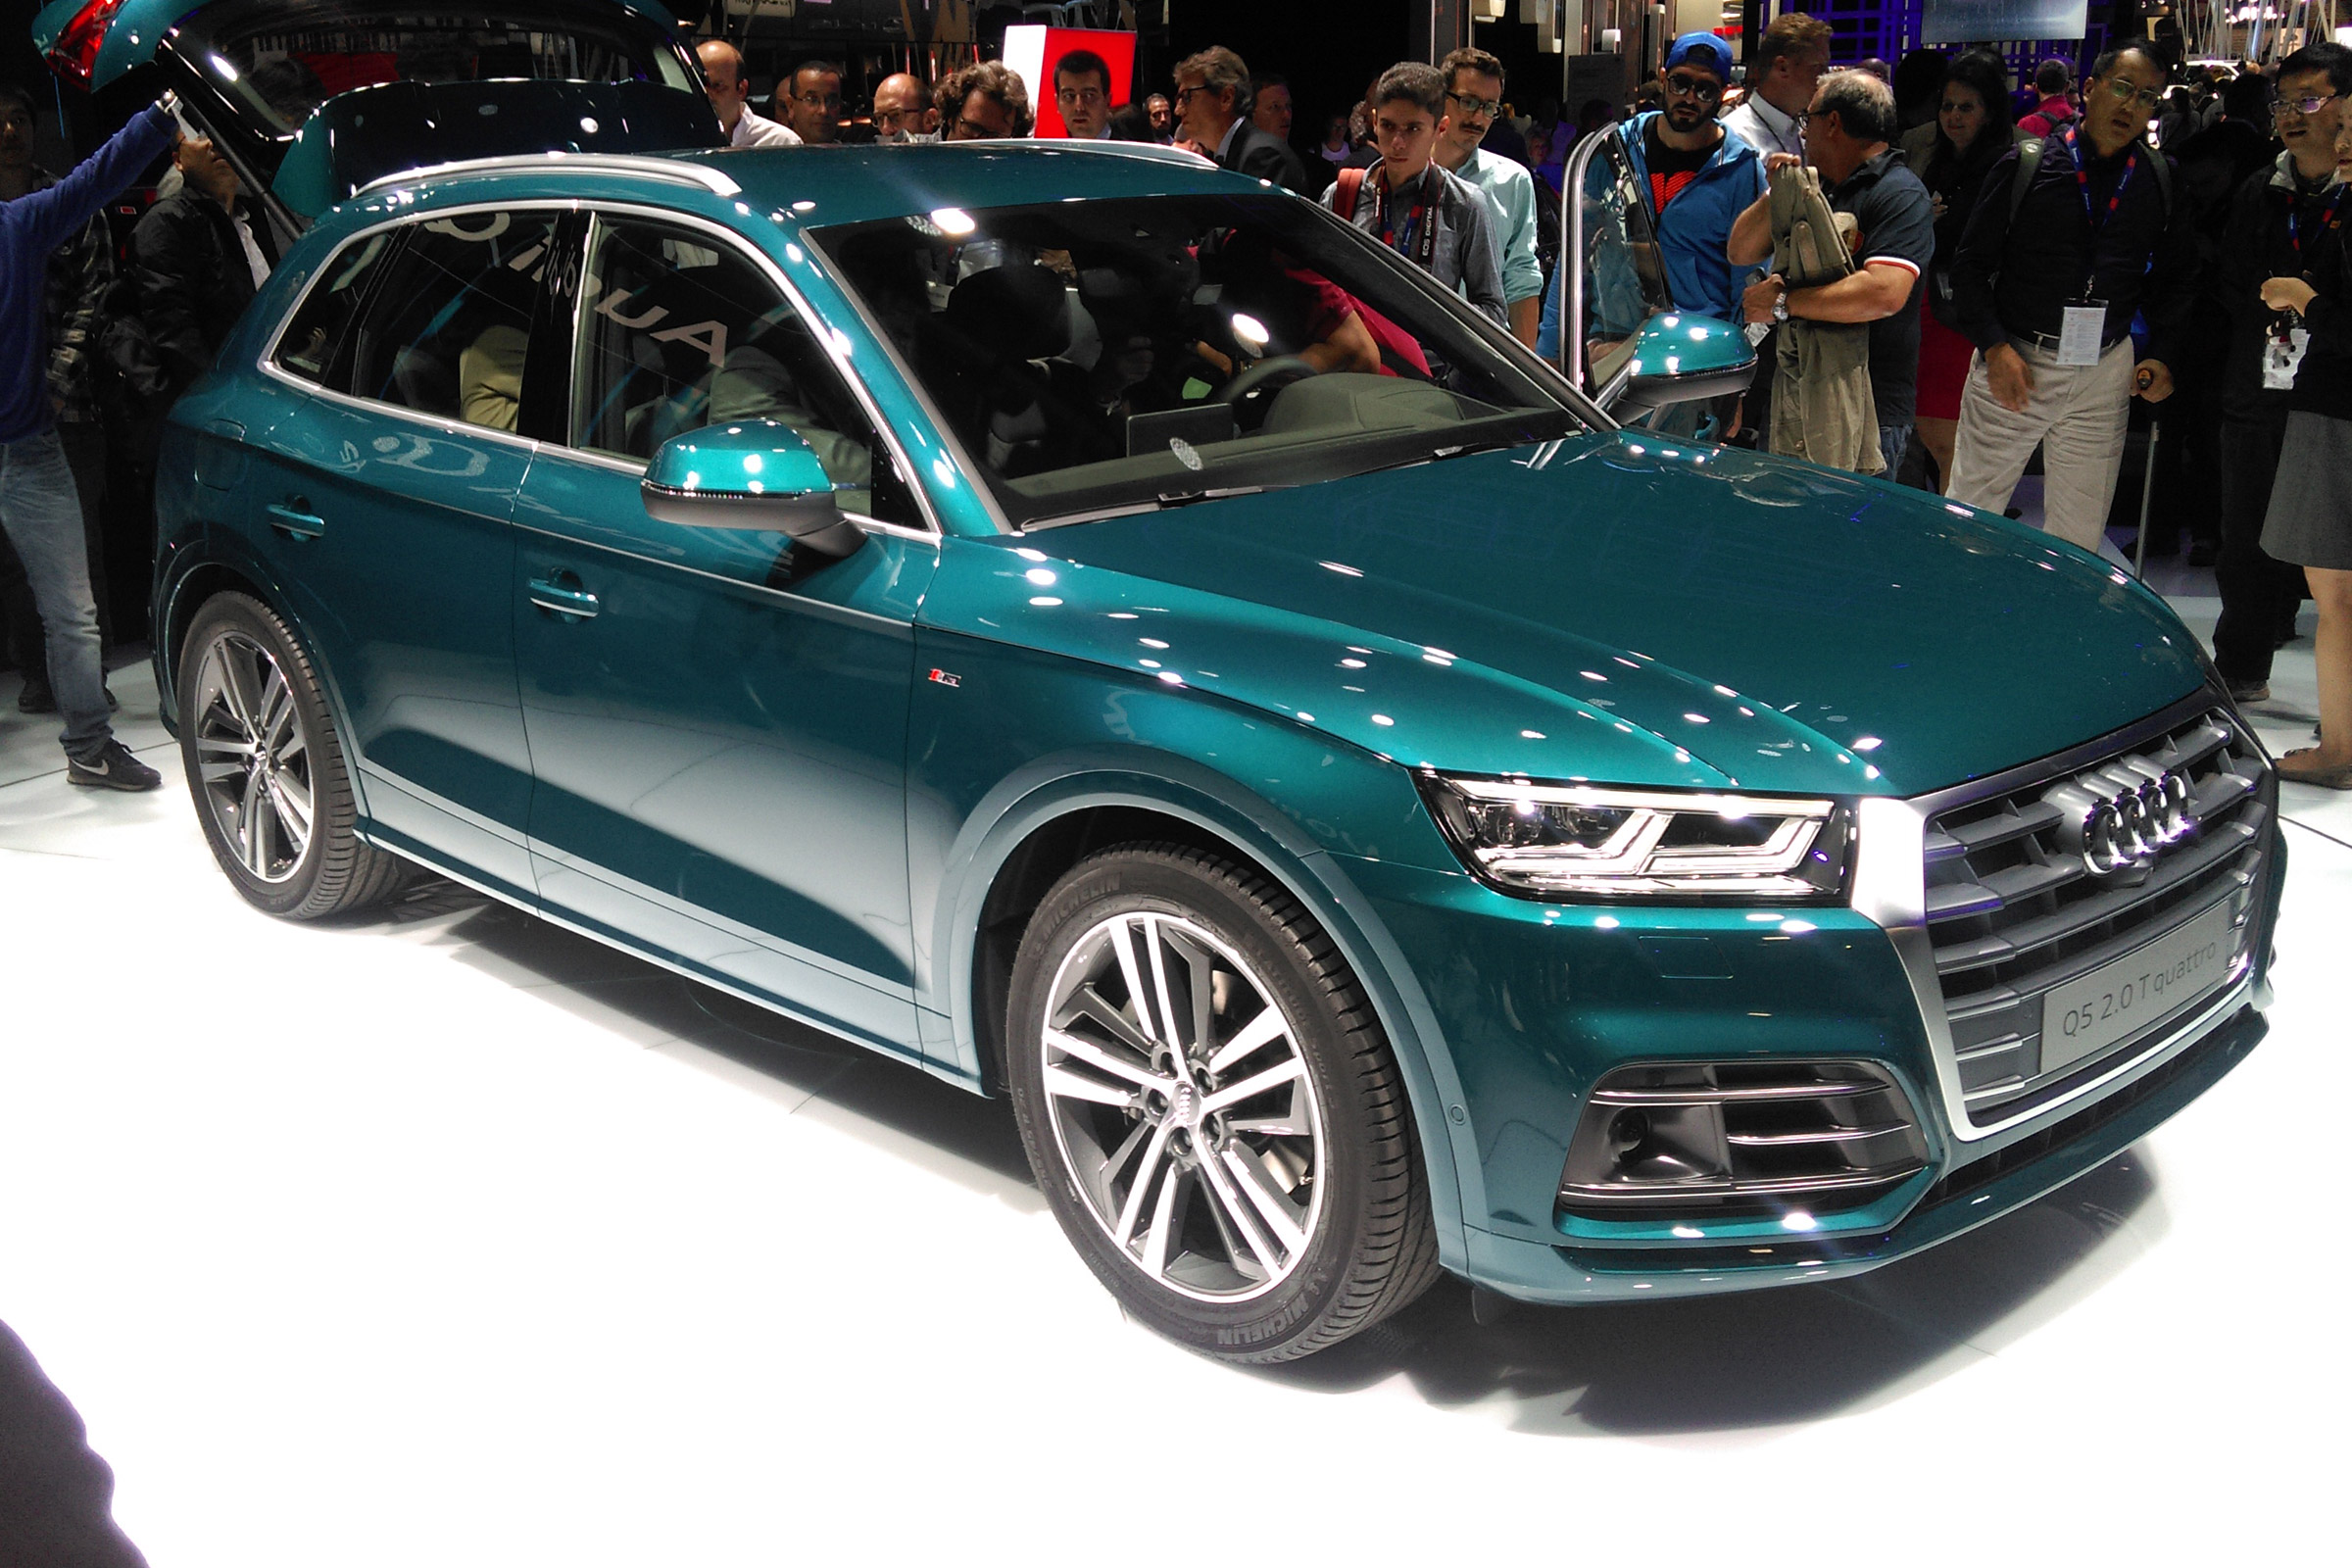 New 2017 Audi Q5 SUV on sale now: prices and specs | Auto Express